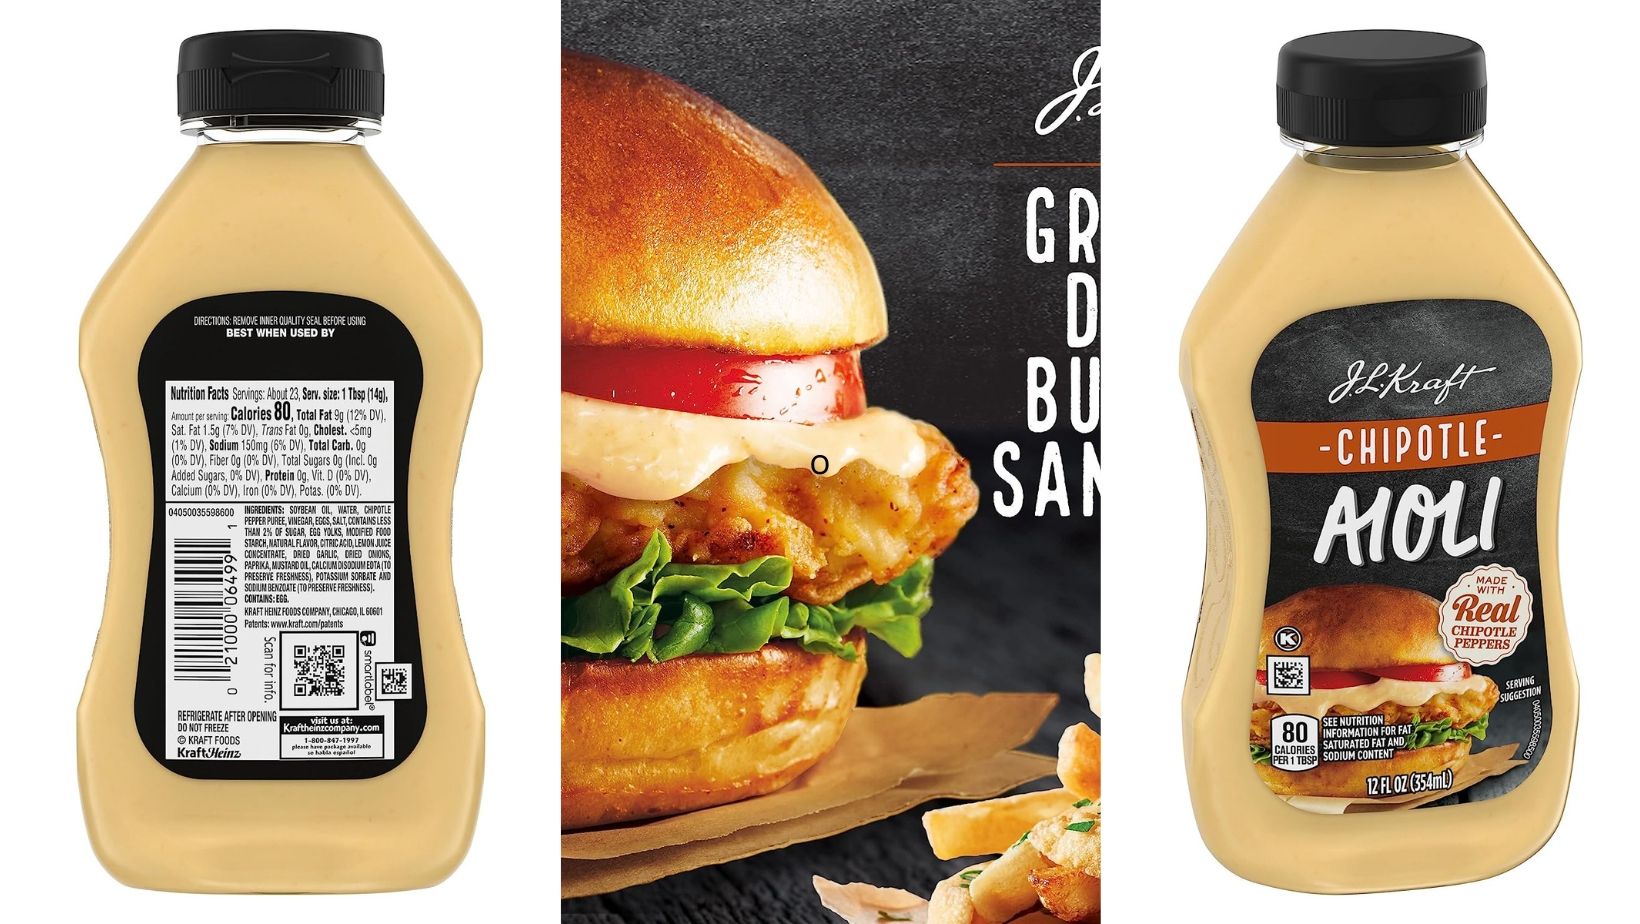 A picture of bottles of sauce and a sandwich.